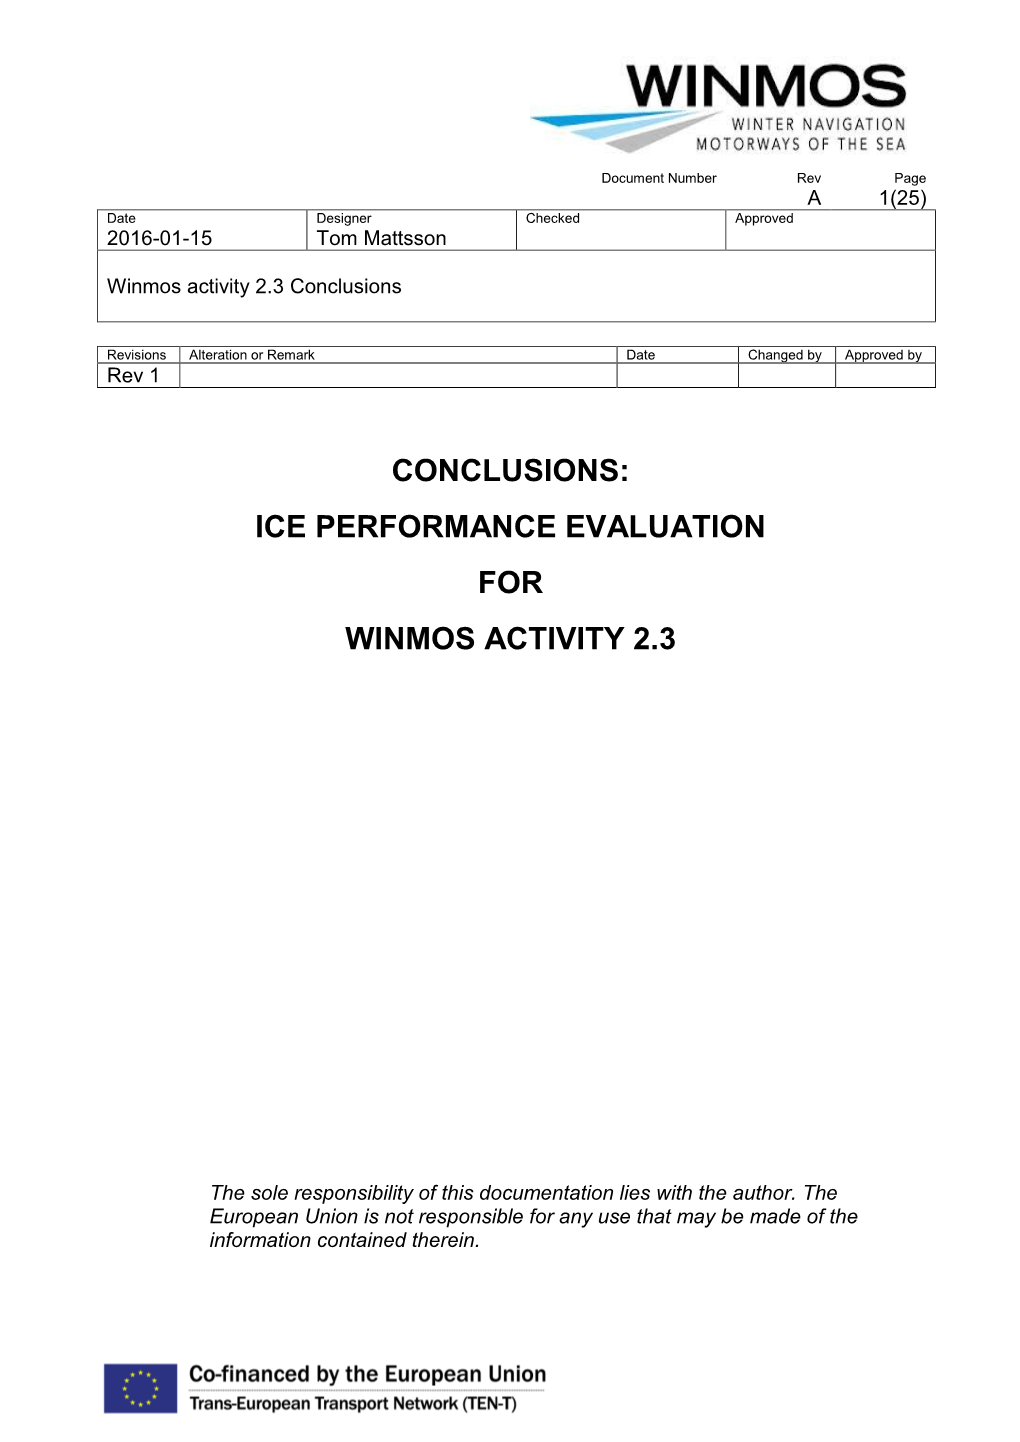 Conclusions: Ice Performance Evaluation for Winmos Activity 2.3